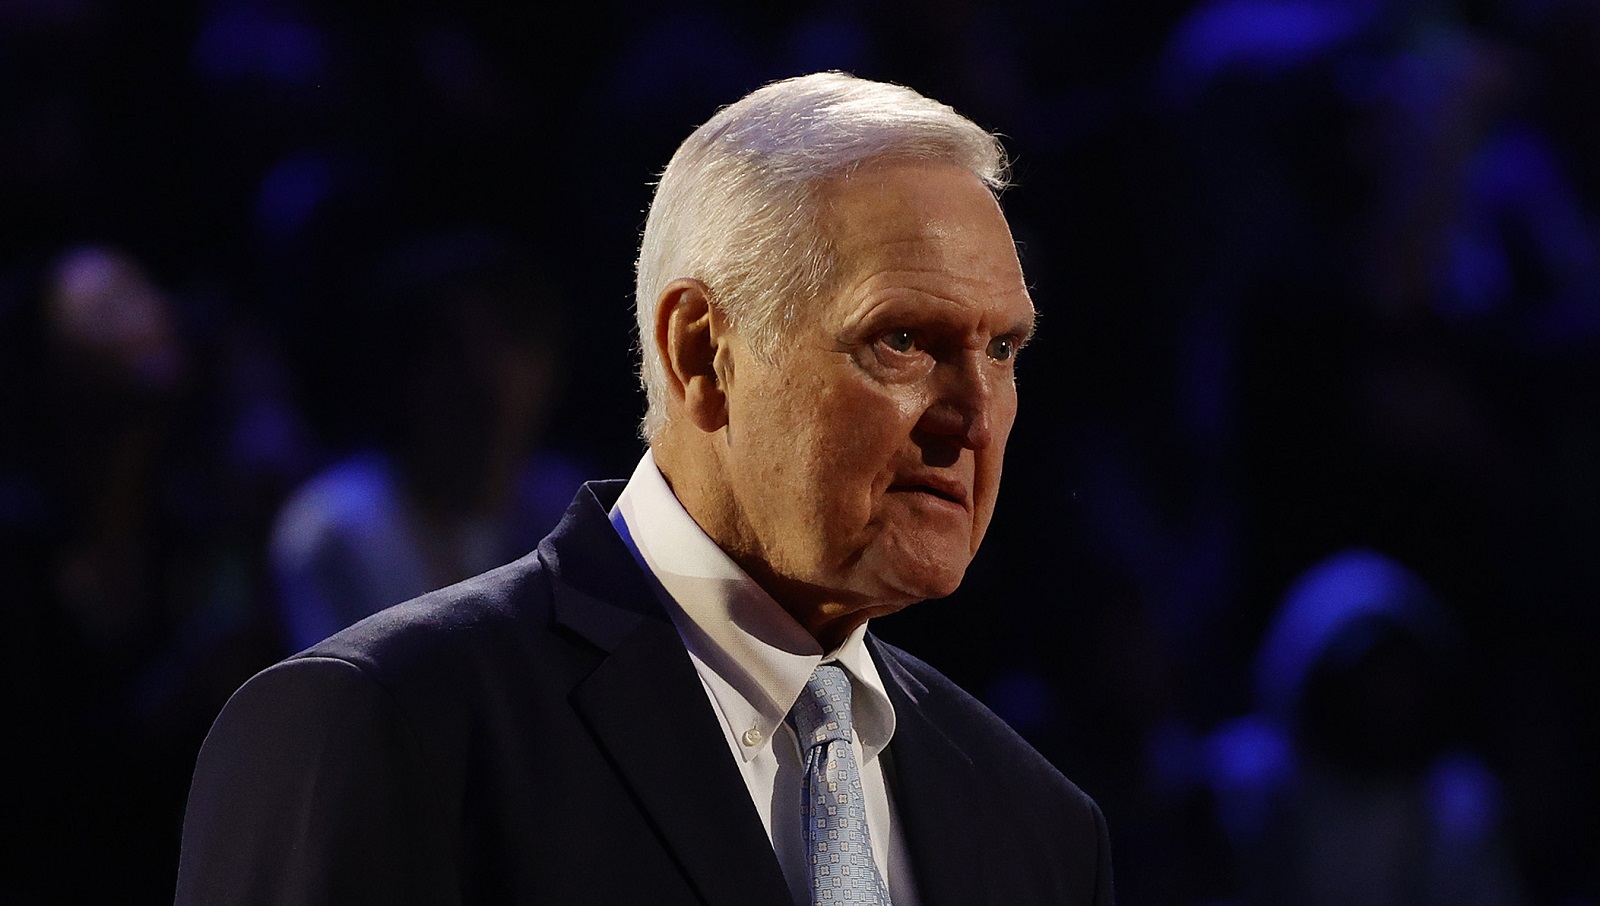 Jerry West reacts after being introduced as part of the NBA 75th Anniversary Team during the 2022 NBA All-Star Game on Feb. 20, 2022. | Tim Nwachukwu/Getty Images